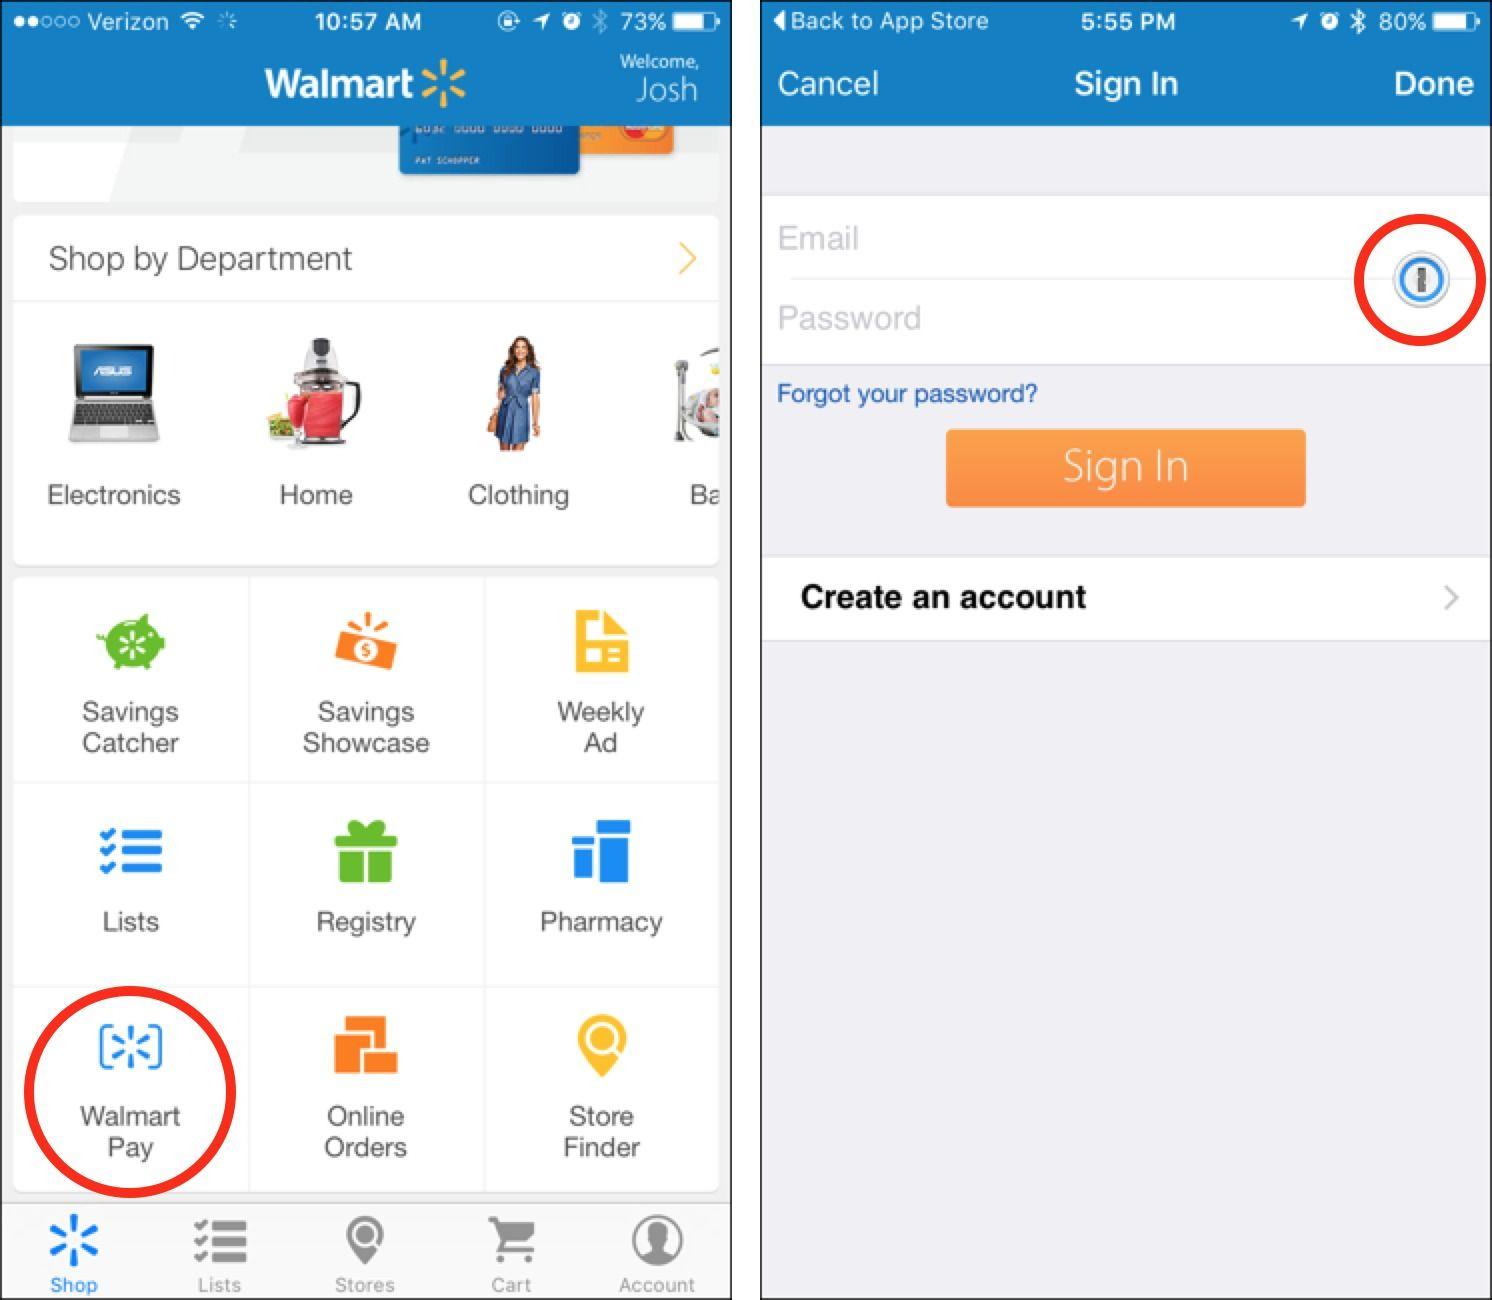 Walmart.com App Logo - Walmart Pay Is Better Than You Might Expect